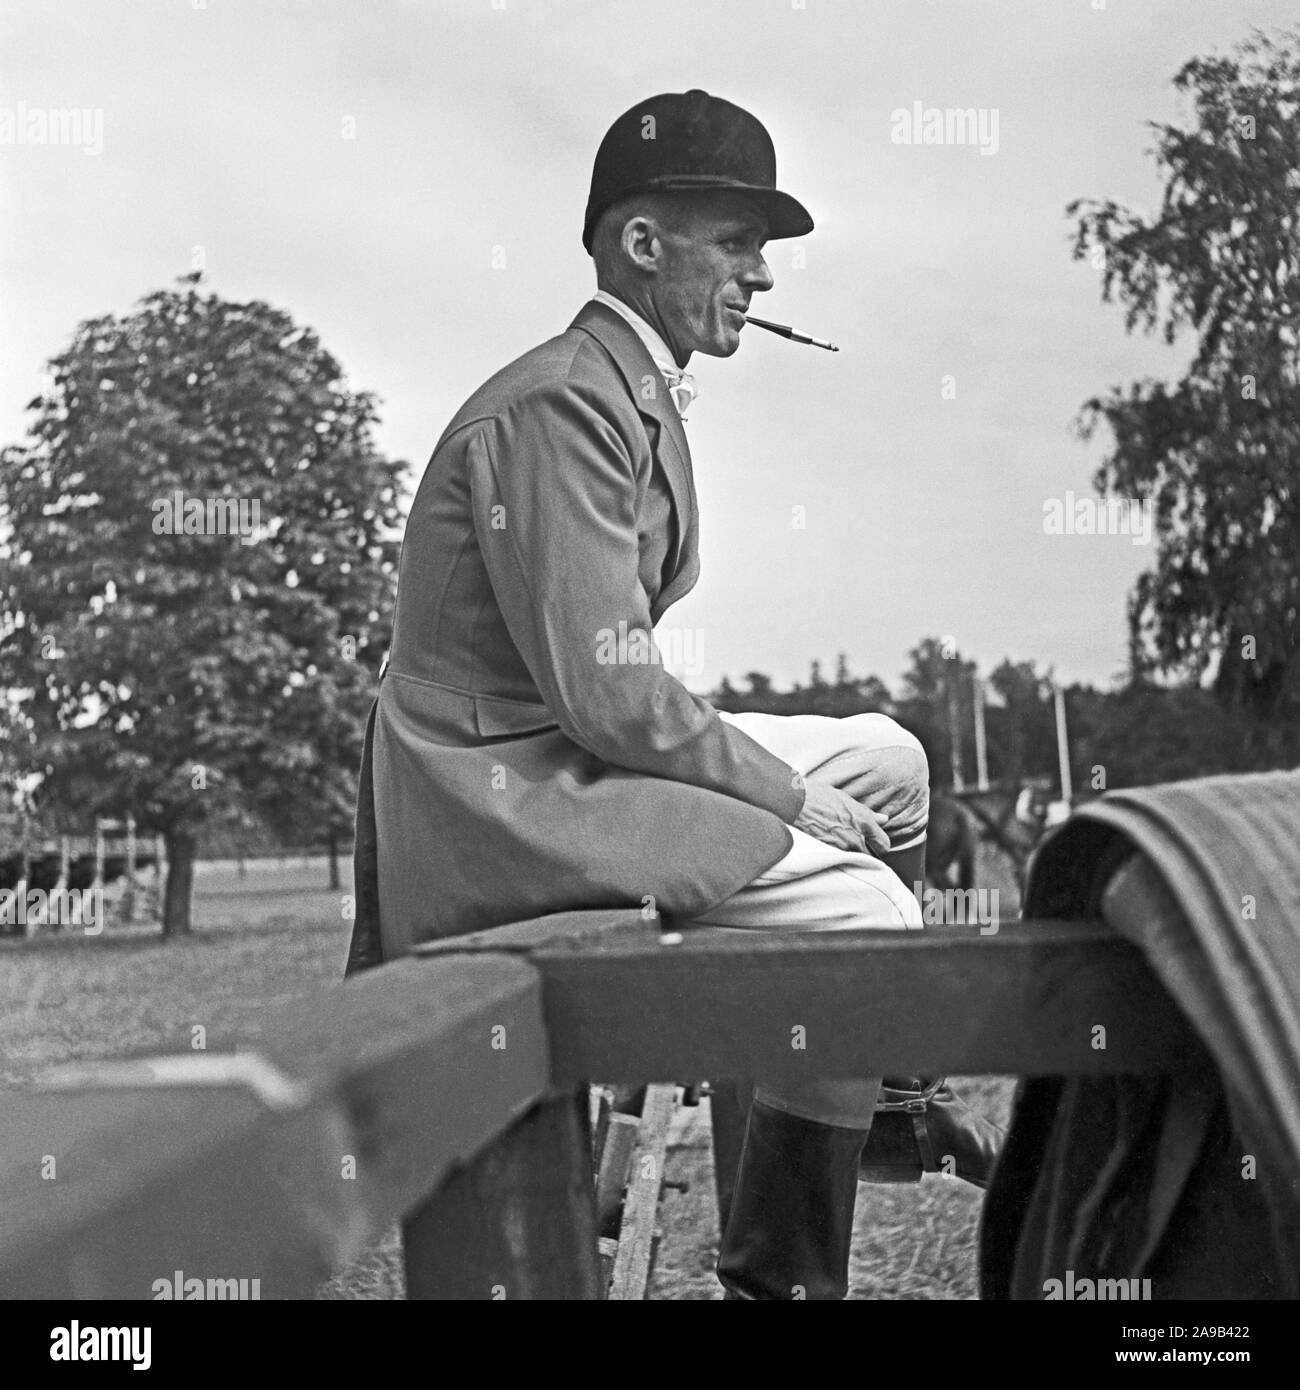 A young man wearing a jacket for an tournament in equestrian sports, Germany 1957 Stock Photo